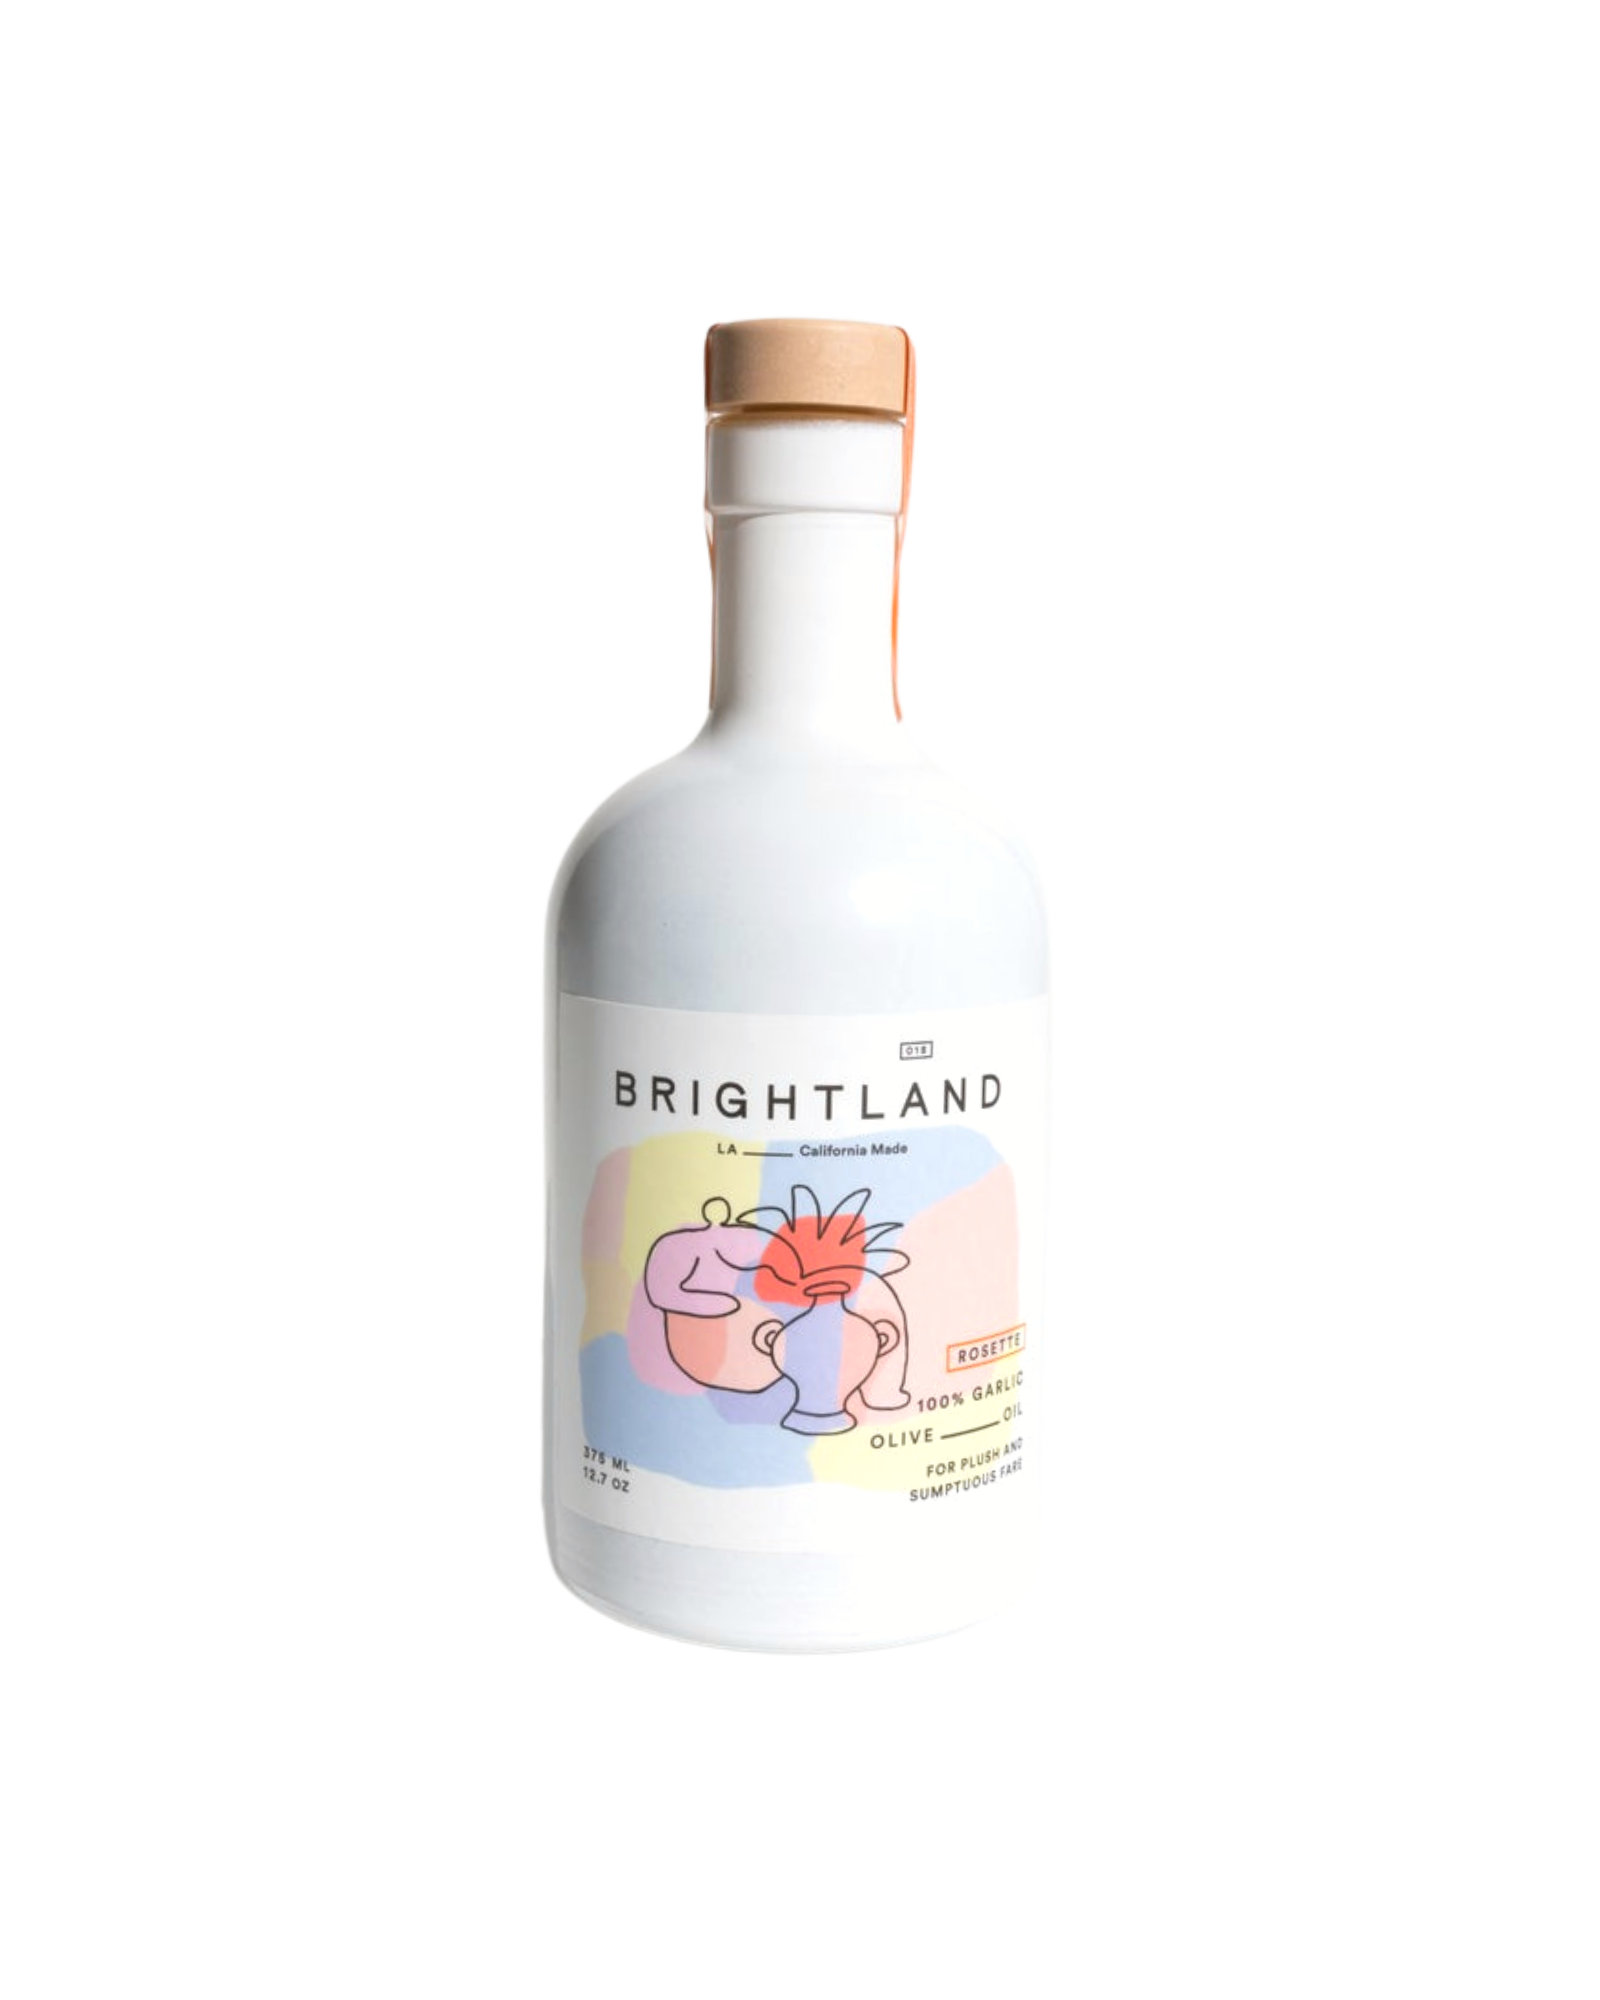 White olive oil bottle with pastel background and illustration on label